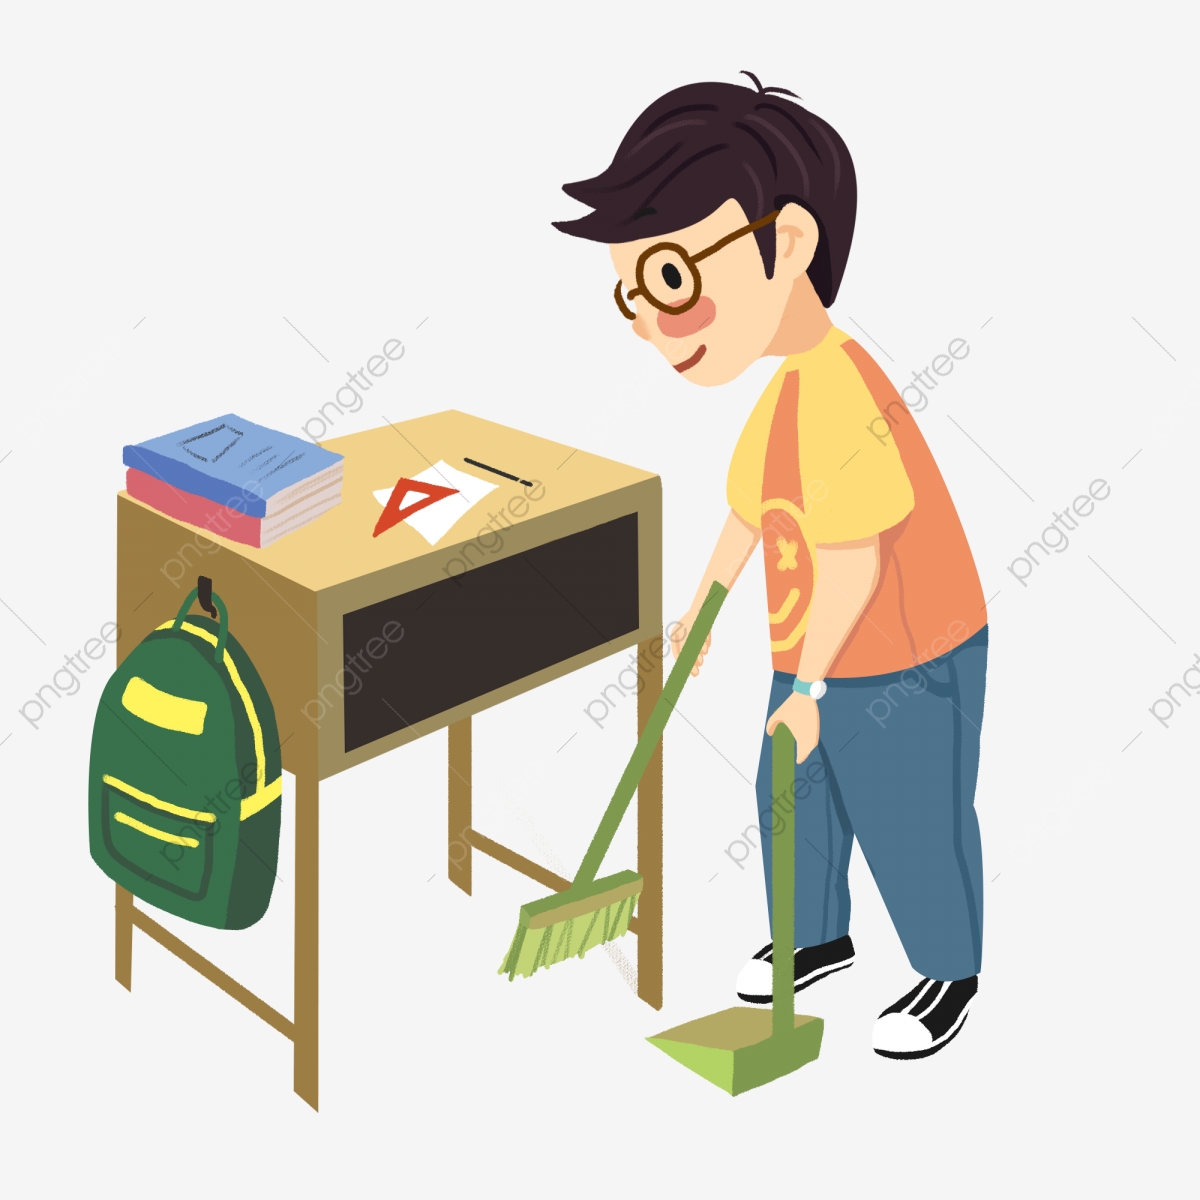 cleaning clipart clean student desk